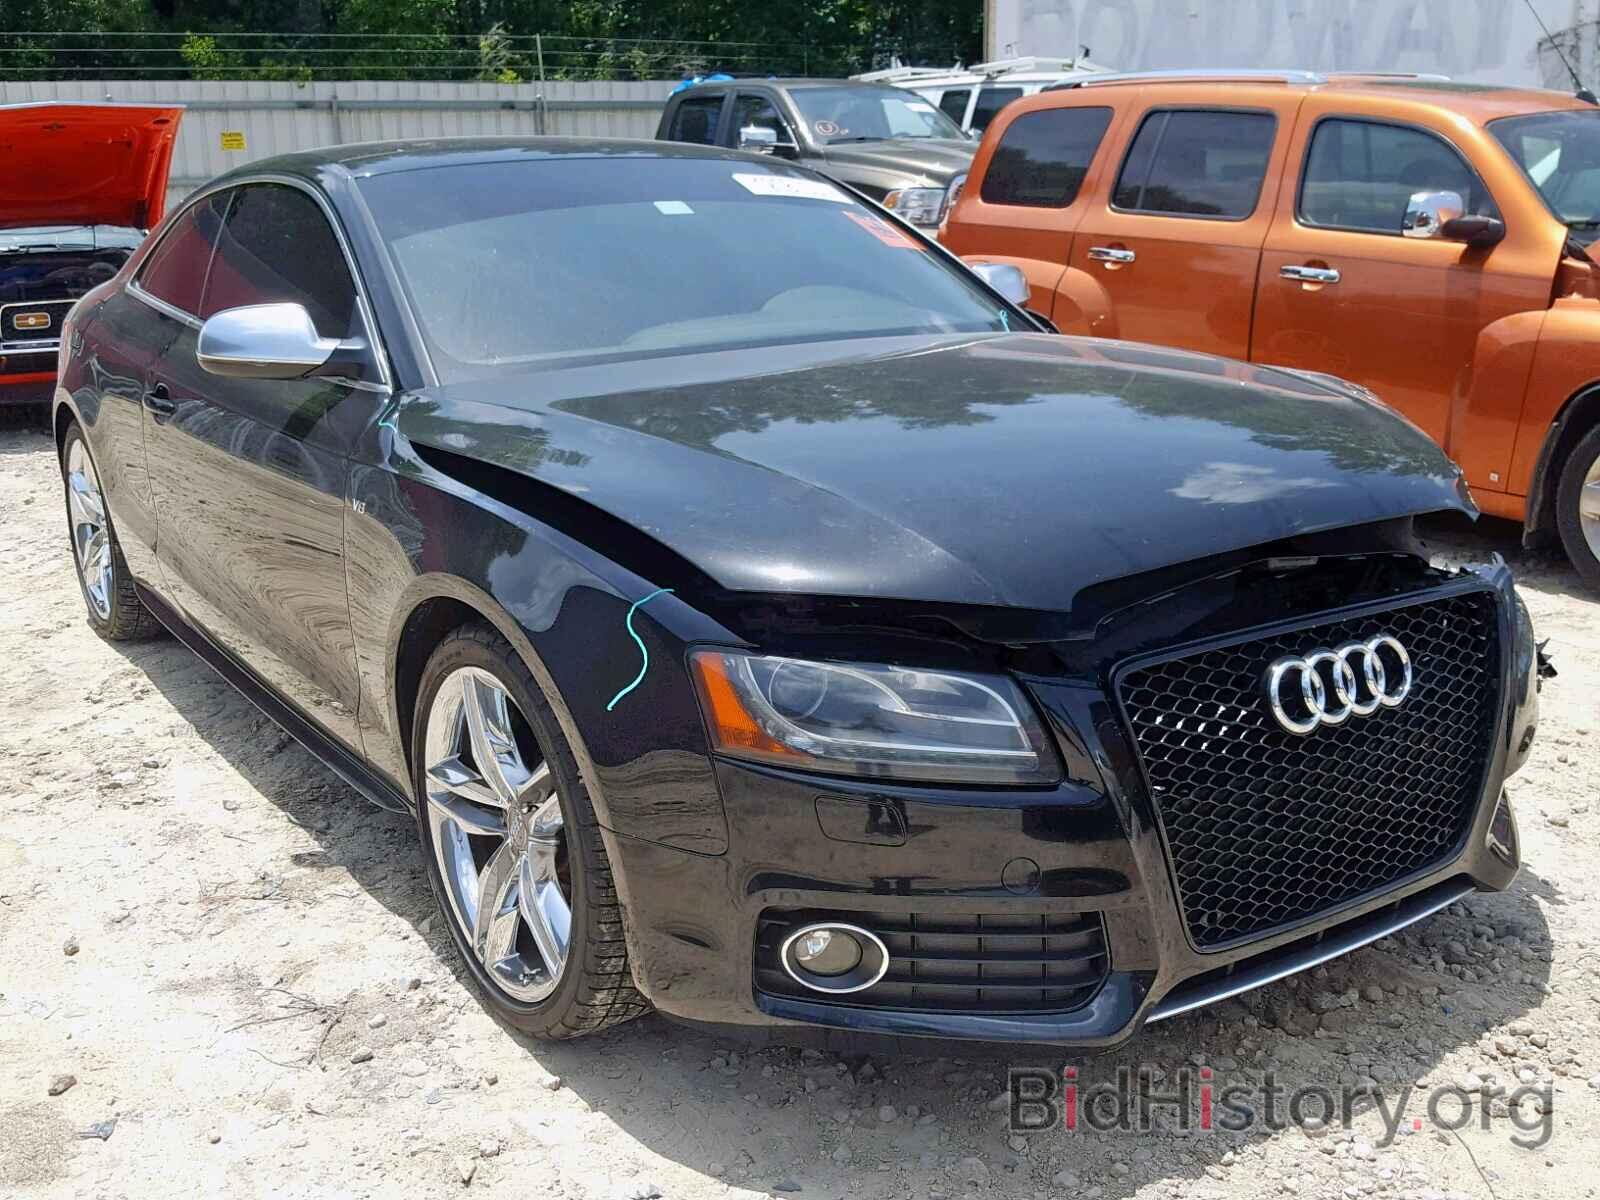 Photo WAUVVAFR3CA001741 - AUDI S5/RS5 2012